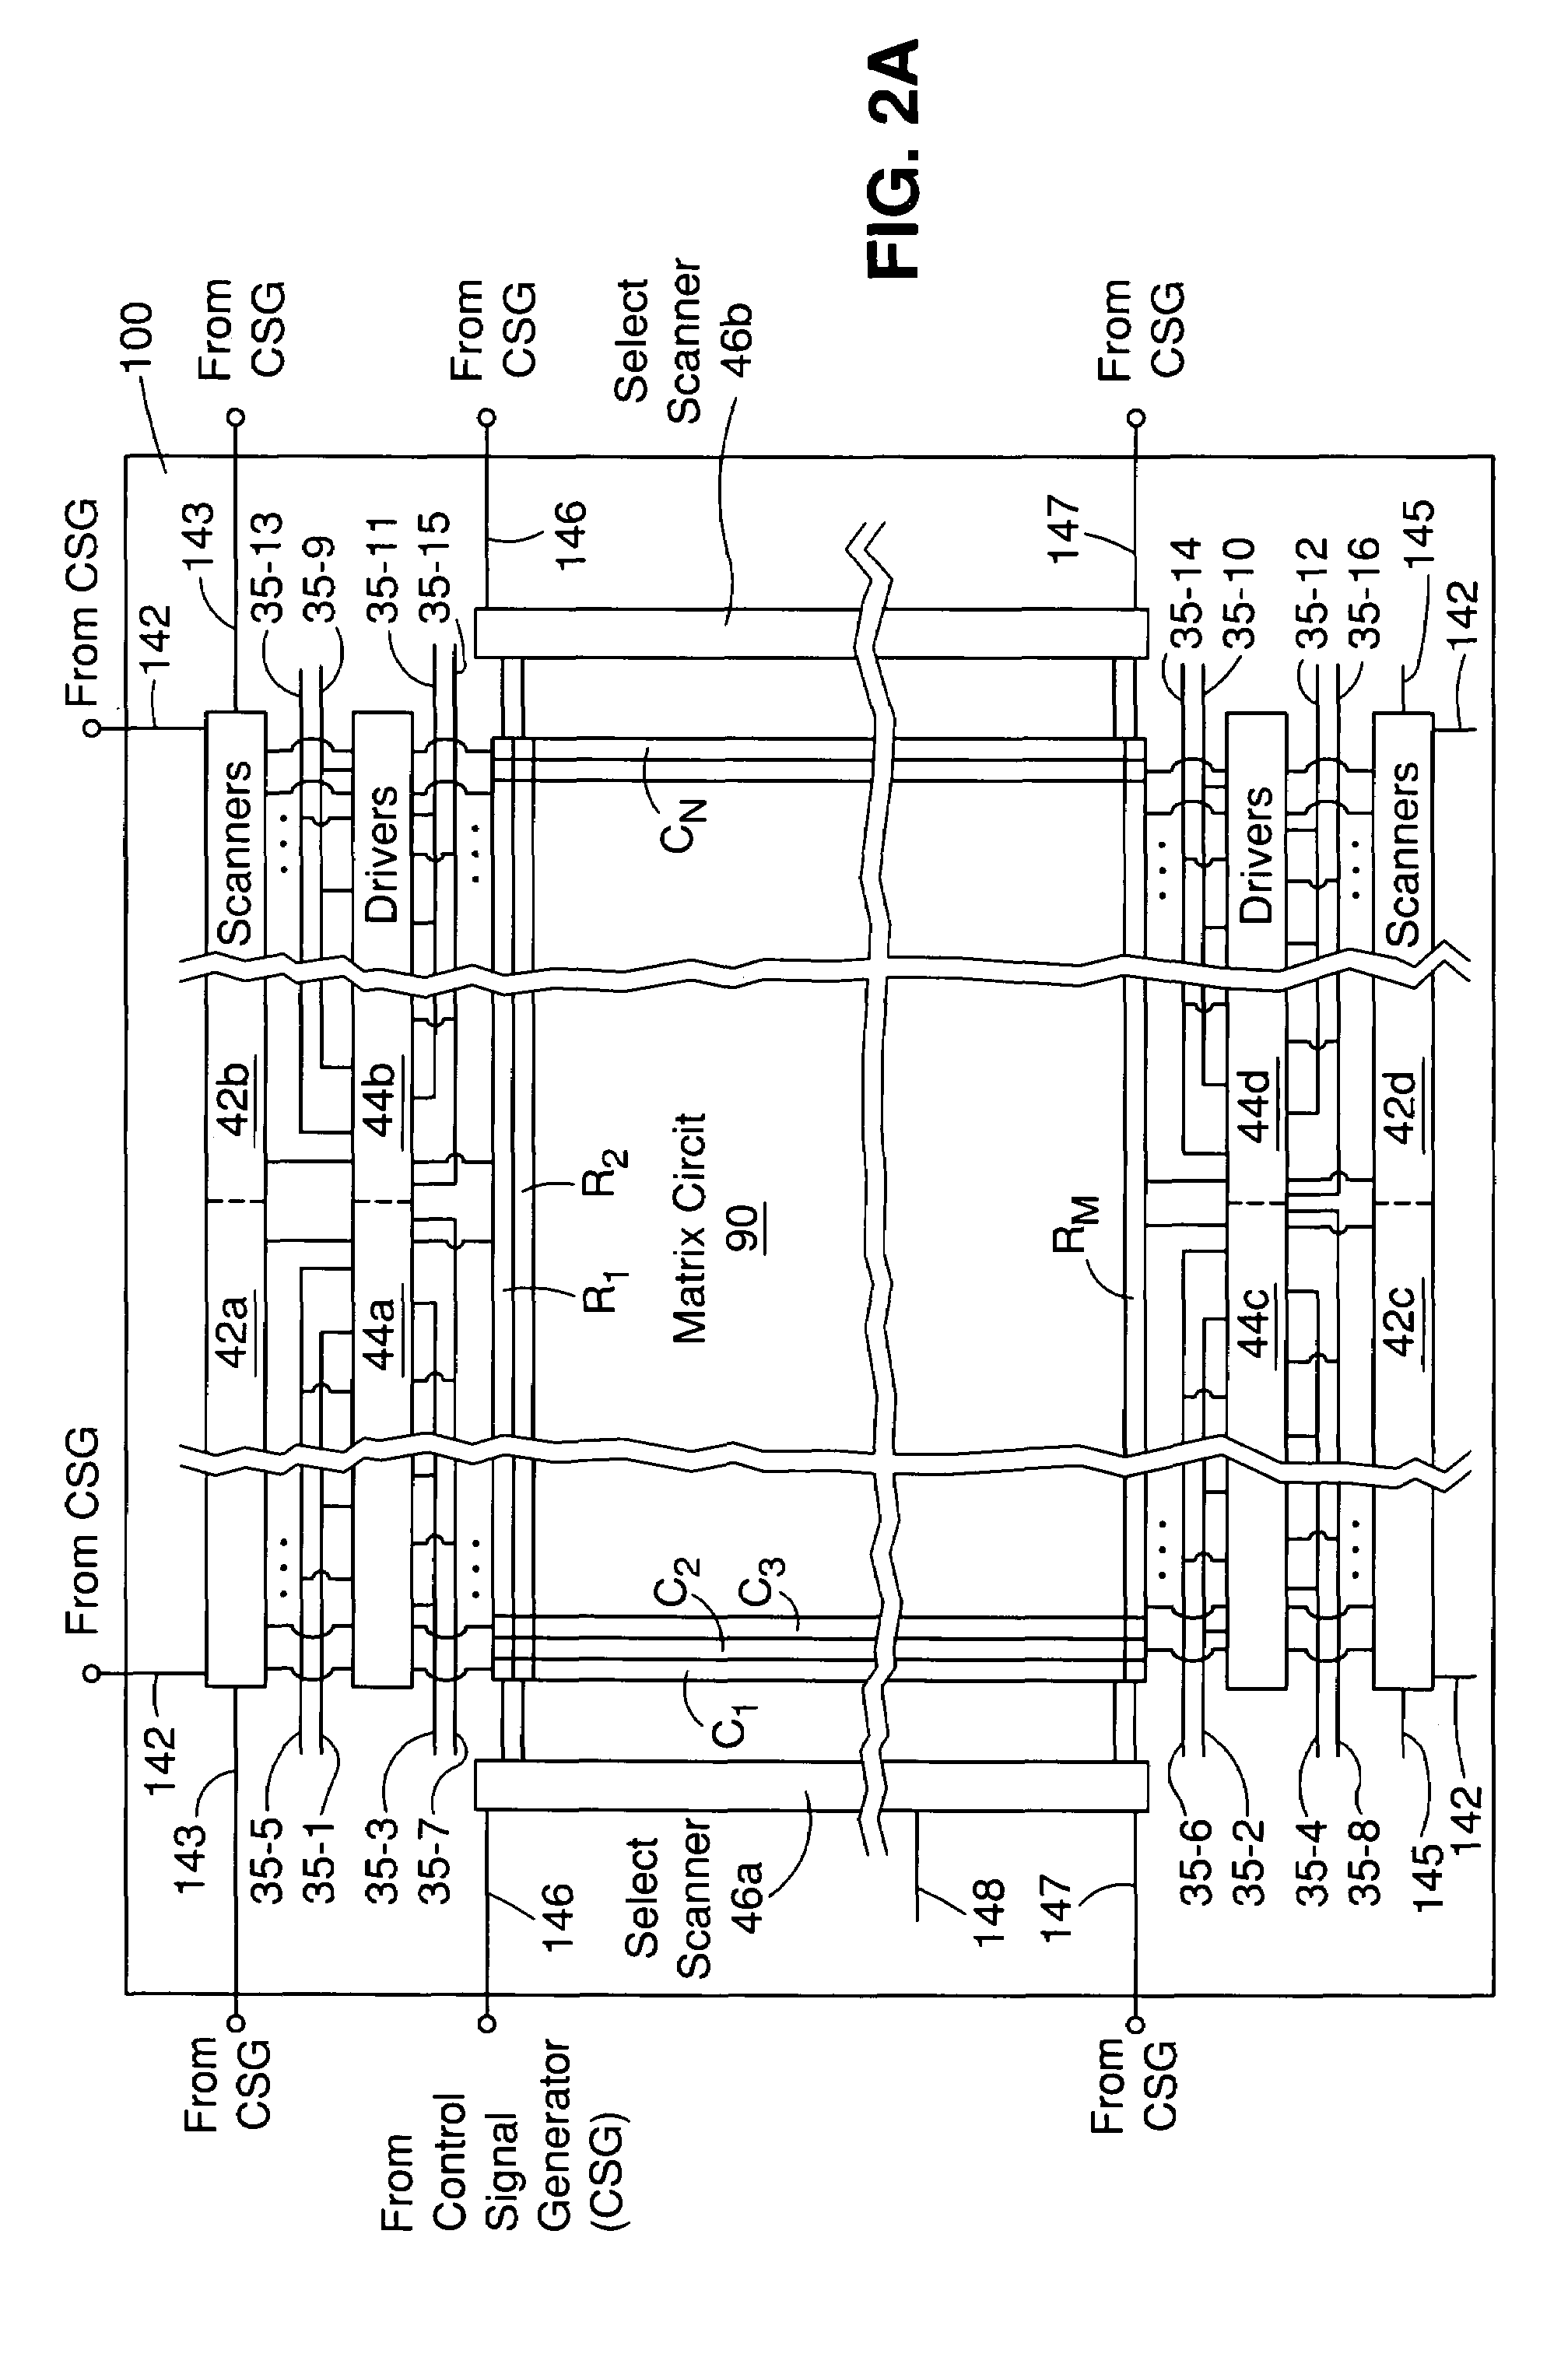 Microdisplay for portable communication systems